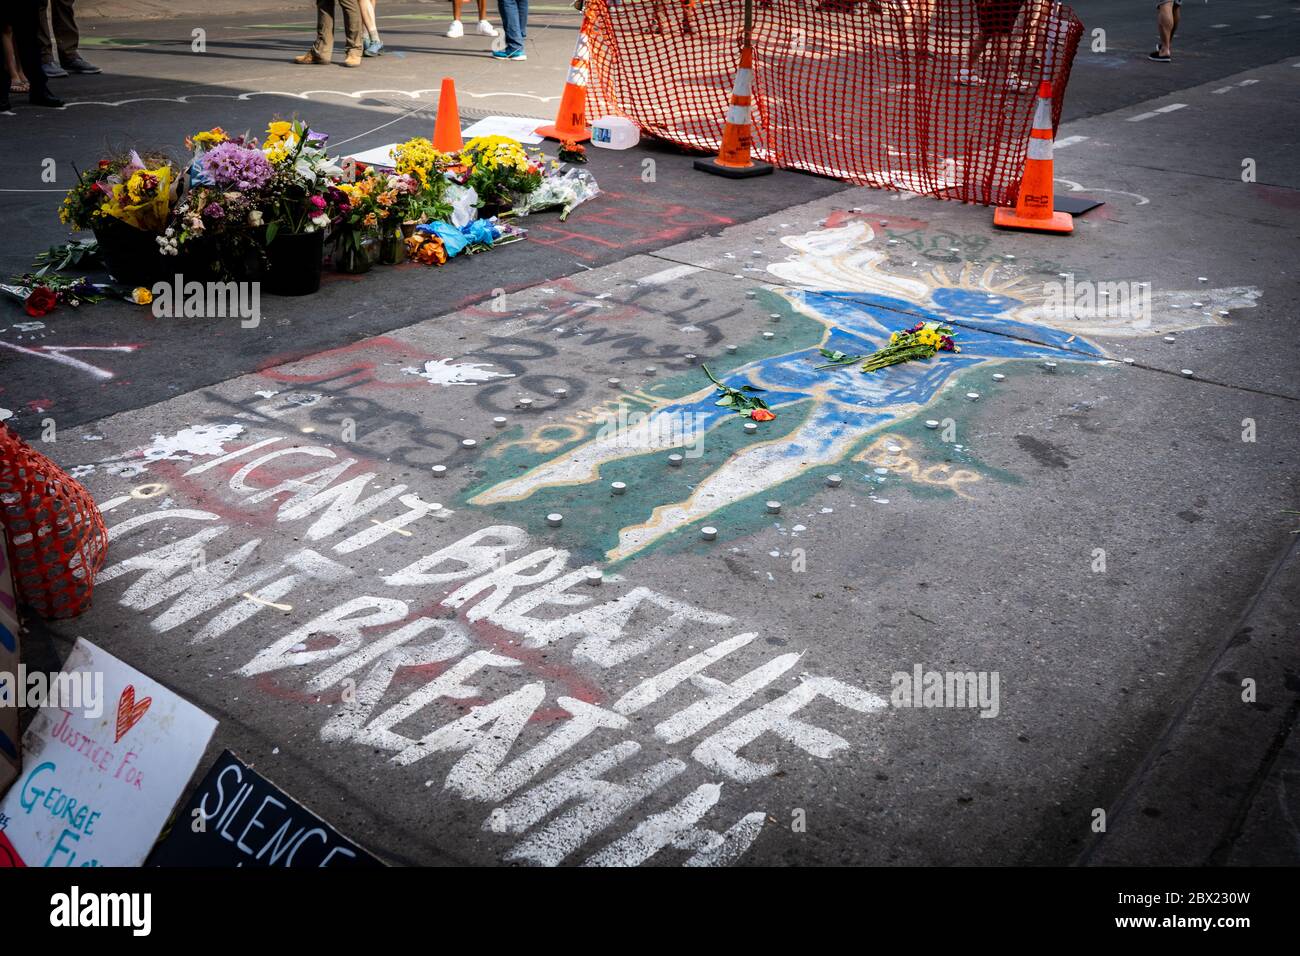 Minneapolis, Minnesota / USA - June 4 2020: The crime scene where police officer Chauvin killed George Floyd at Cup Foods and Black Lives Matter prote Stock Photo